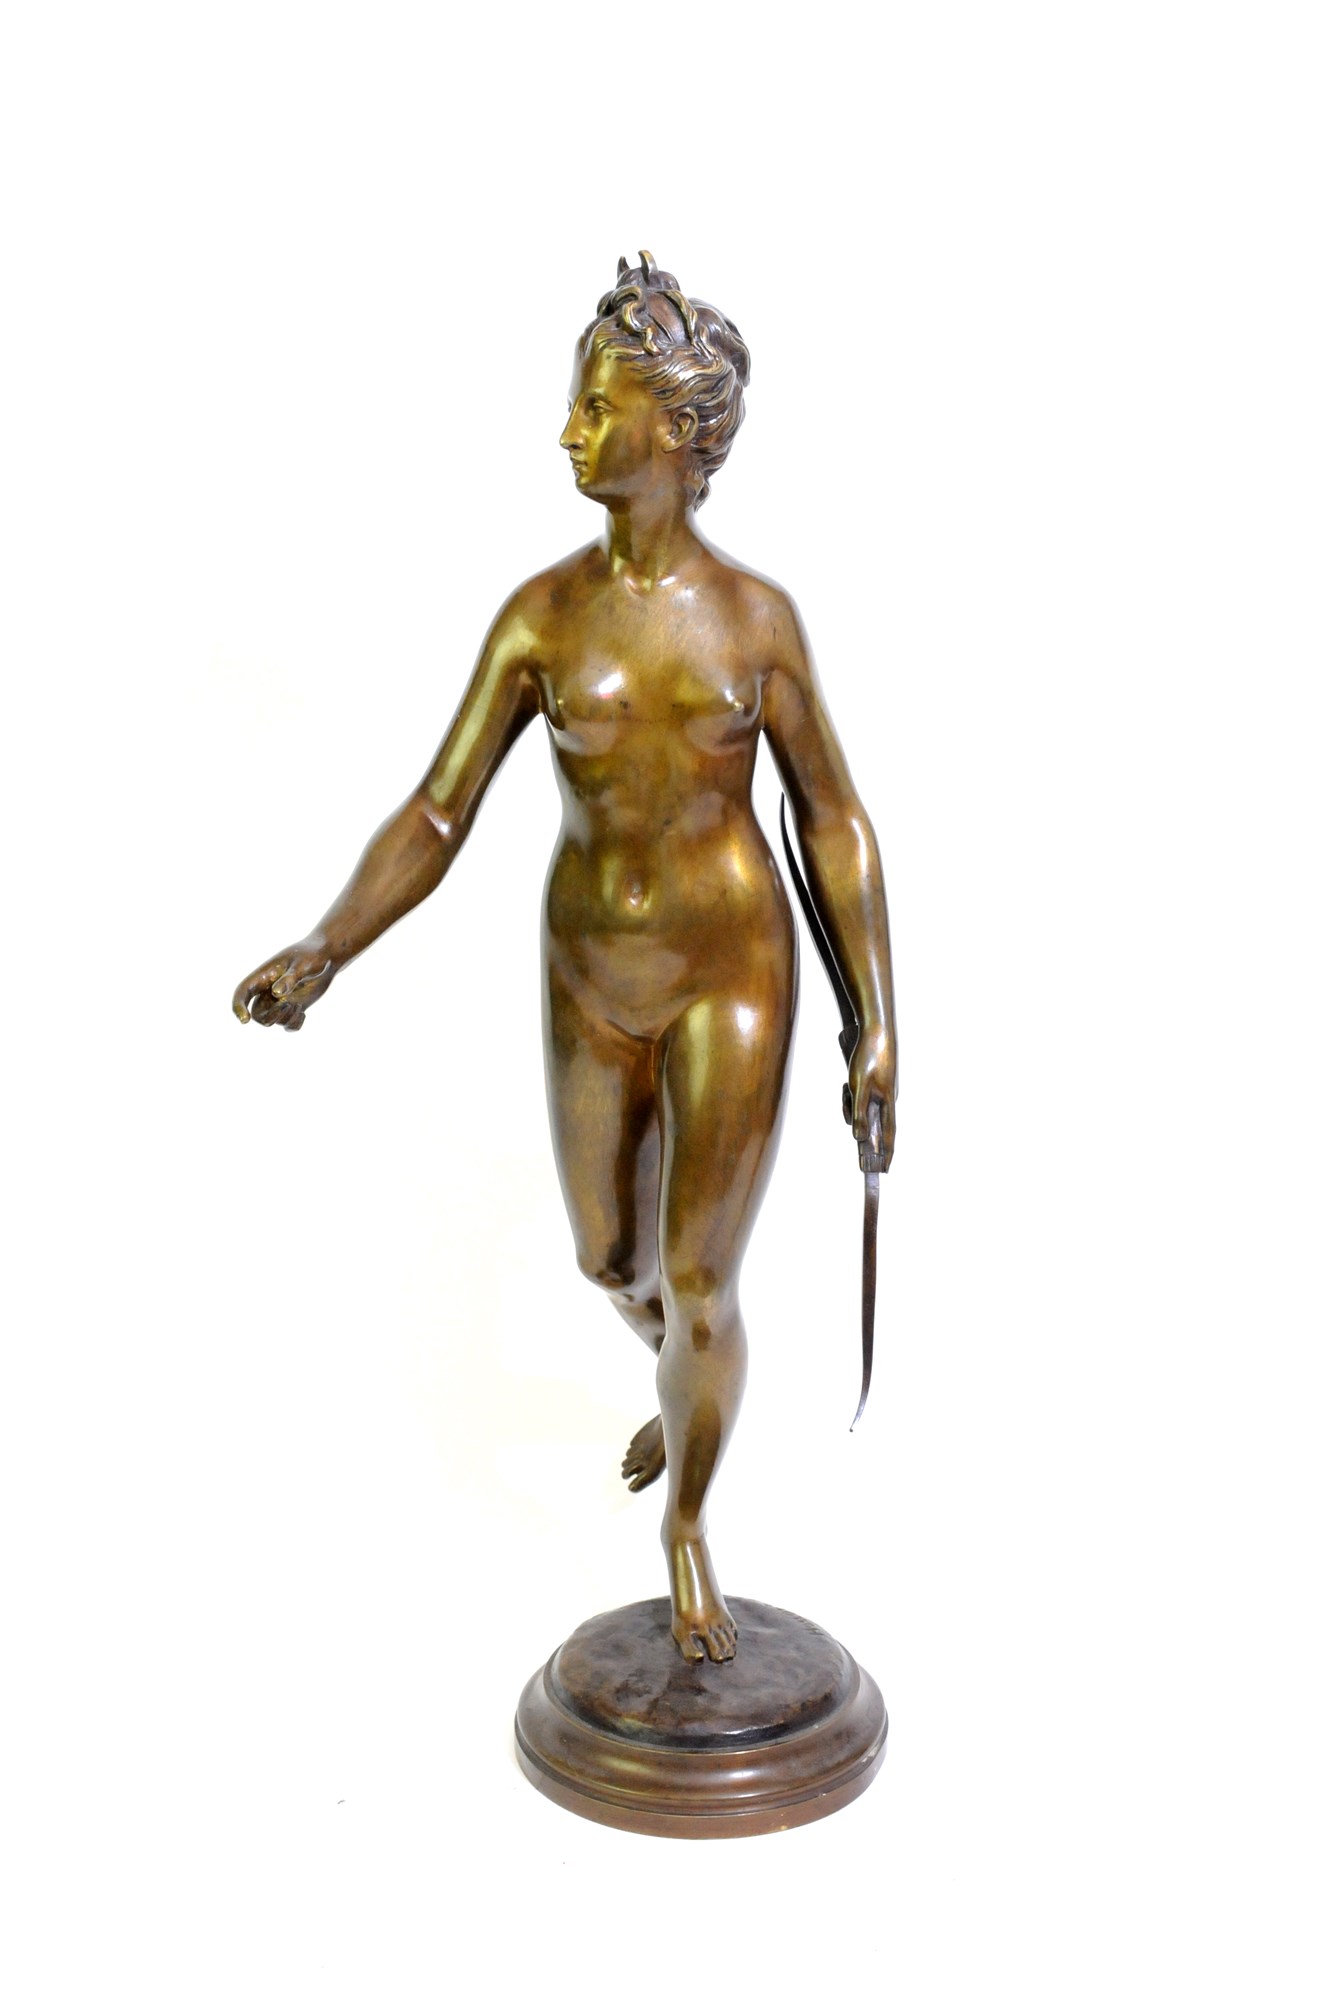 A French 19th century bronze figure of Diana the Huntress